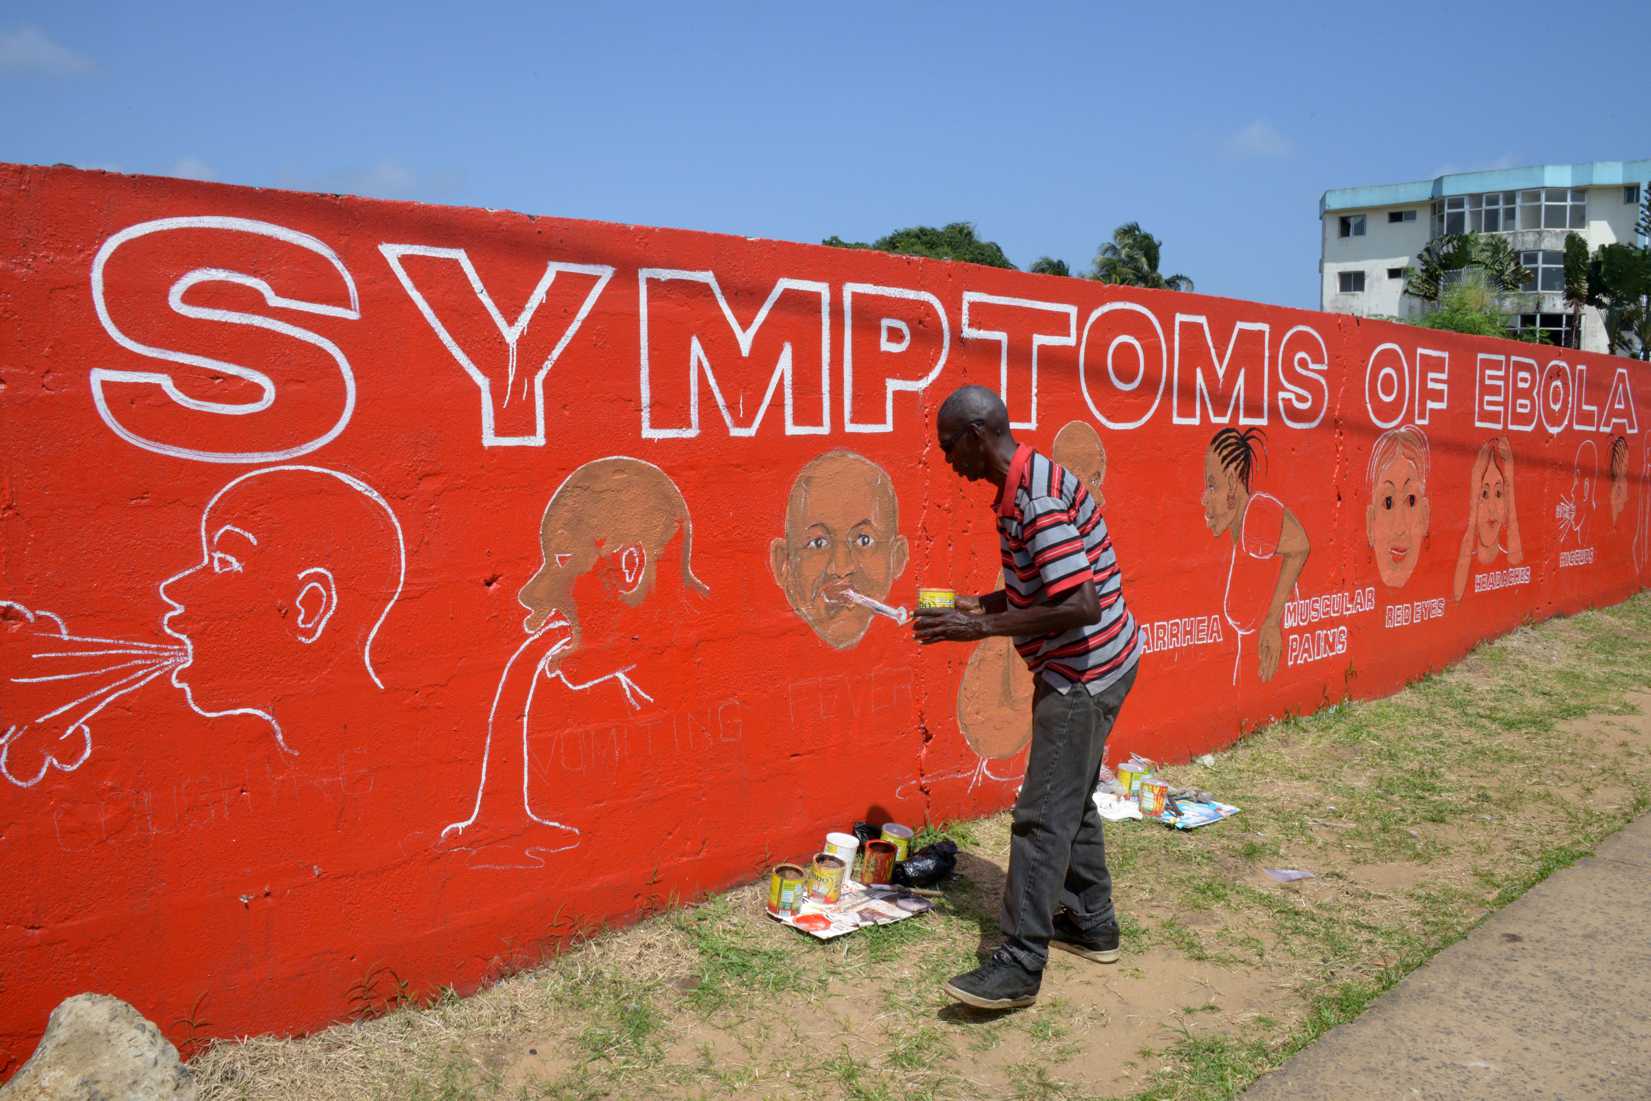 A street artist, Stephen Doe, paints an educational mural to inform people about the symptoms of the deadly Ebola virus in the Liberian capital, Monrovia, on Sept. 8, 2014 (Dominique Faget—AFP/Getty Images)